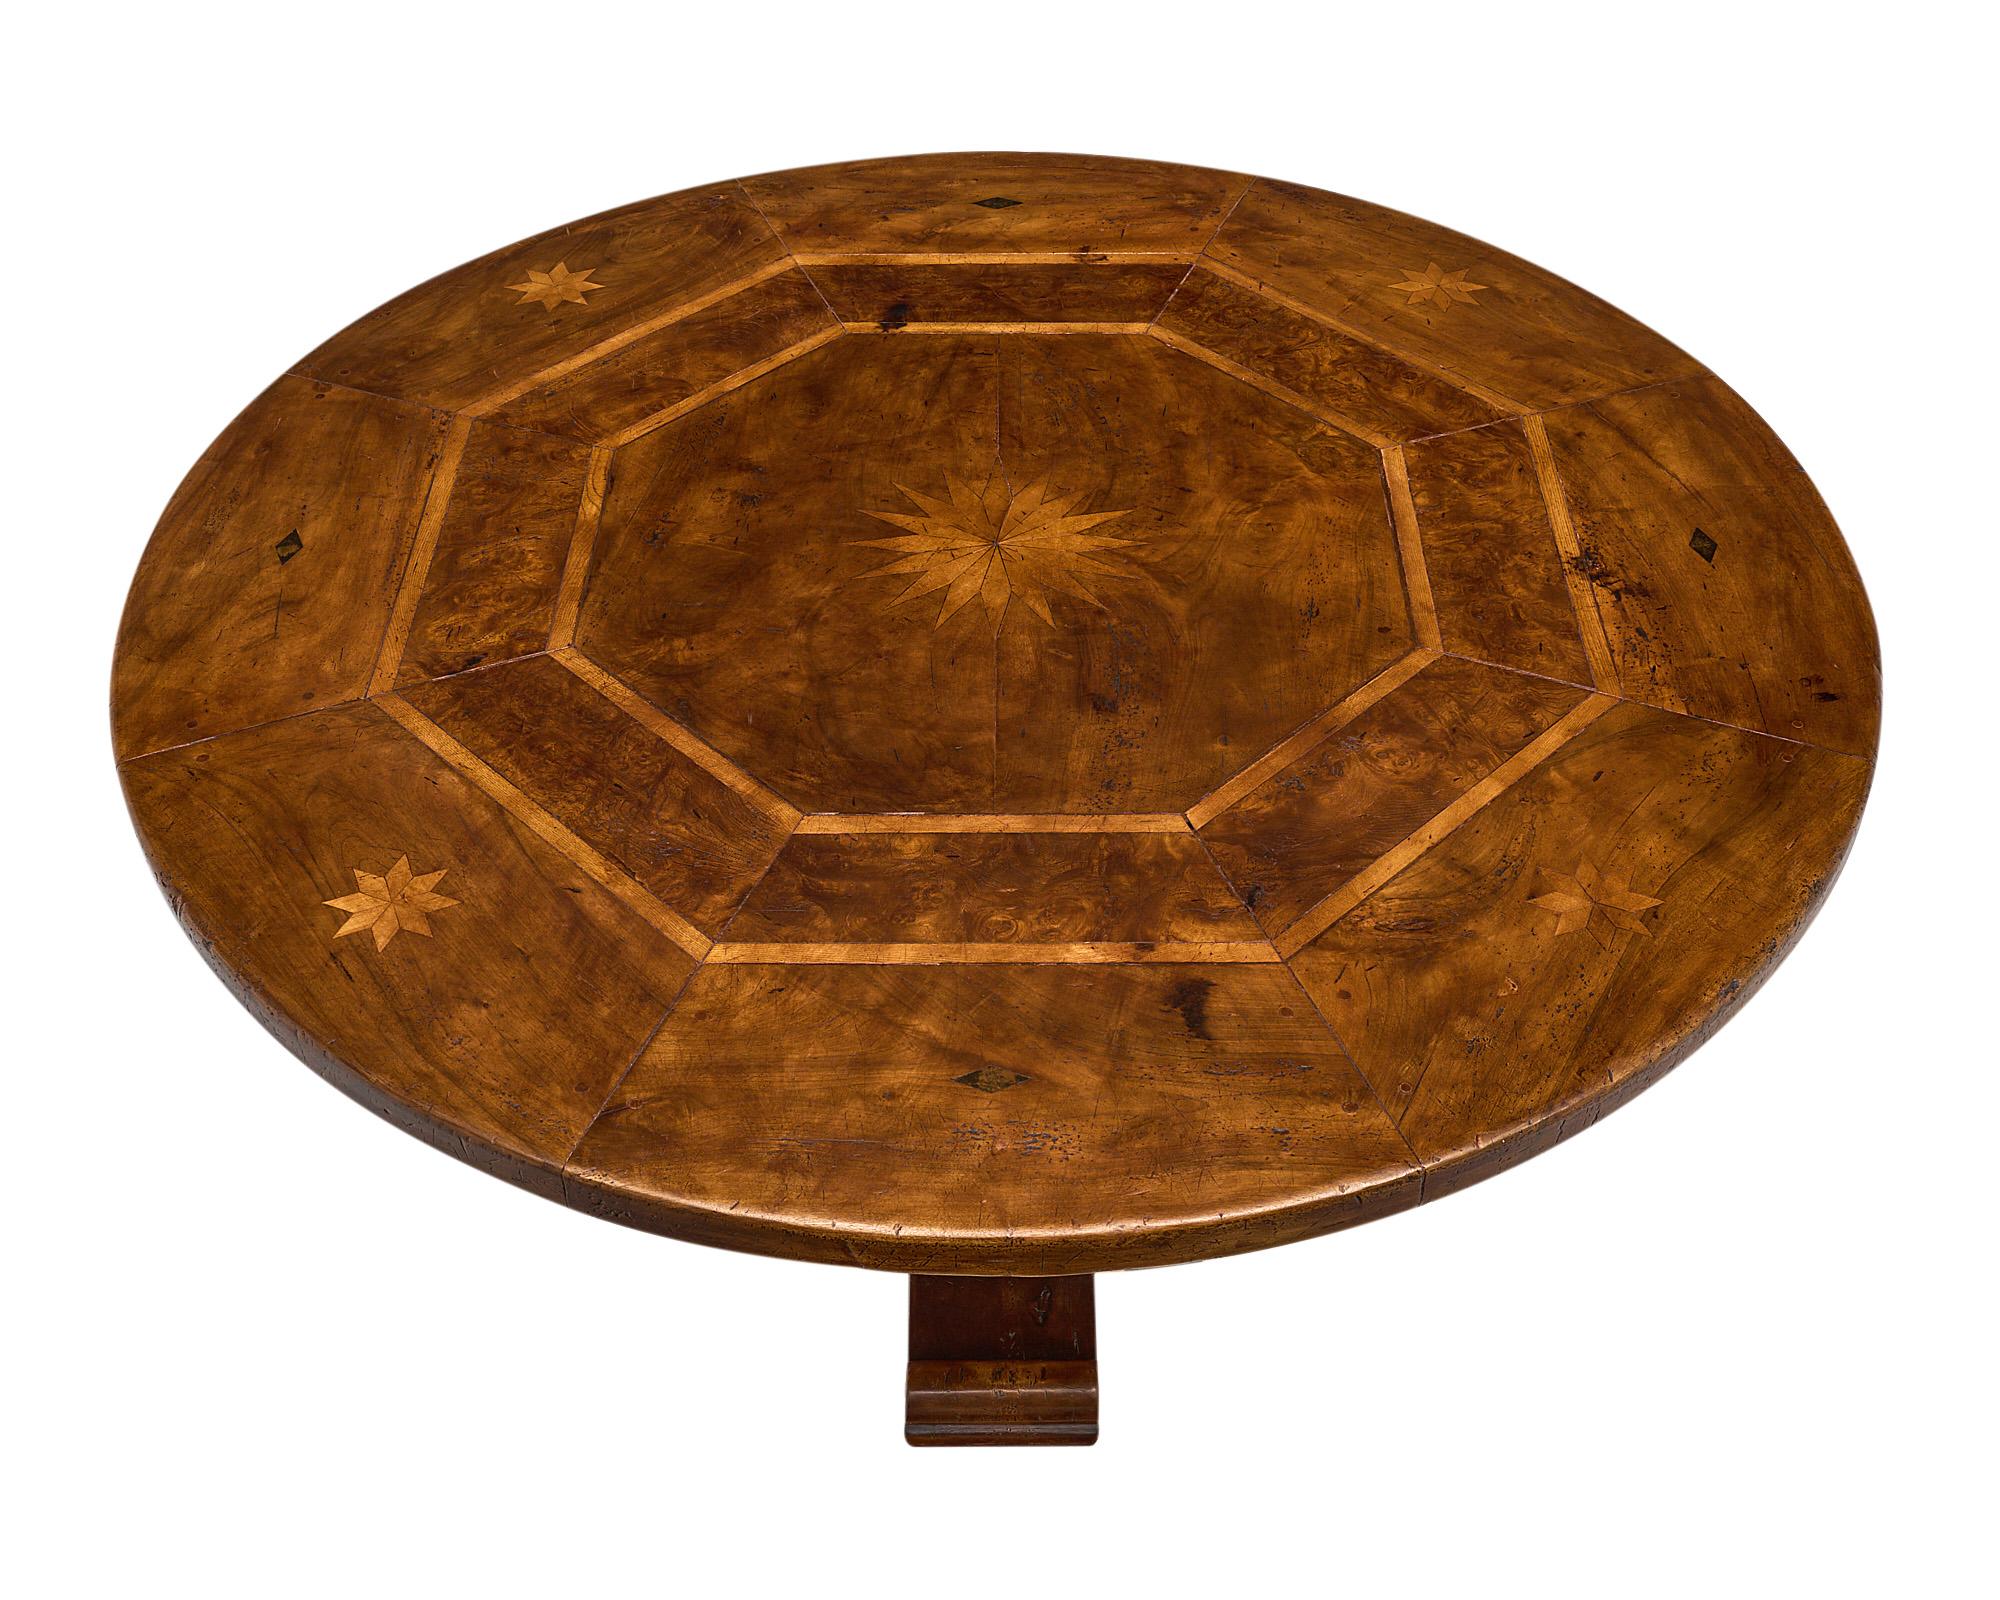 Round dining room table, French, made of solid walnut and burled walnut with inlaid details of a central star. This piece features pegged construction, a hand carved central pedestal, and four scrolled feet. 
 